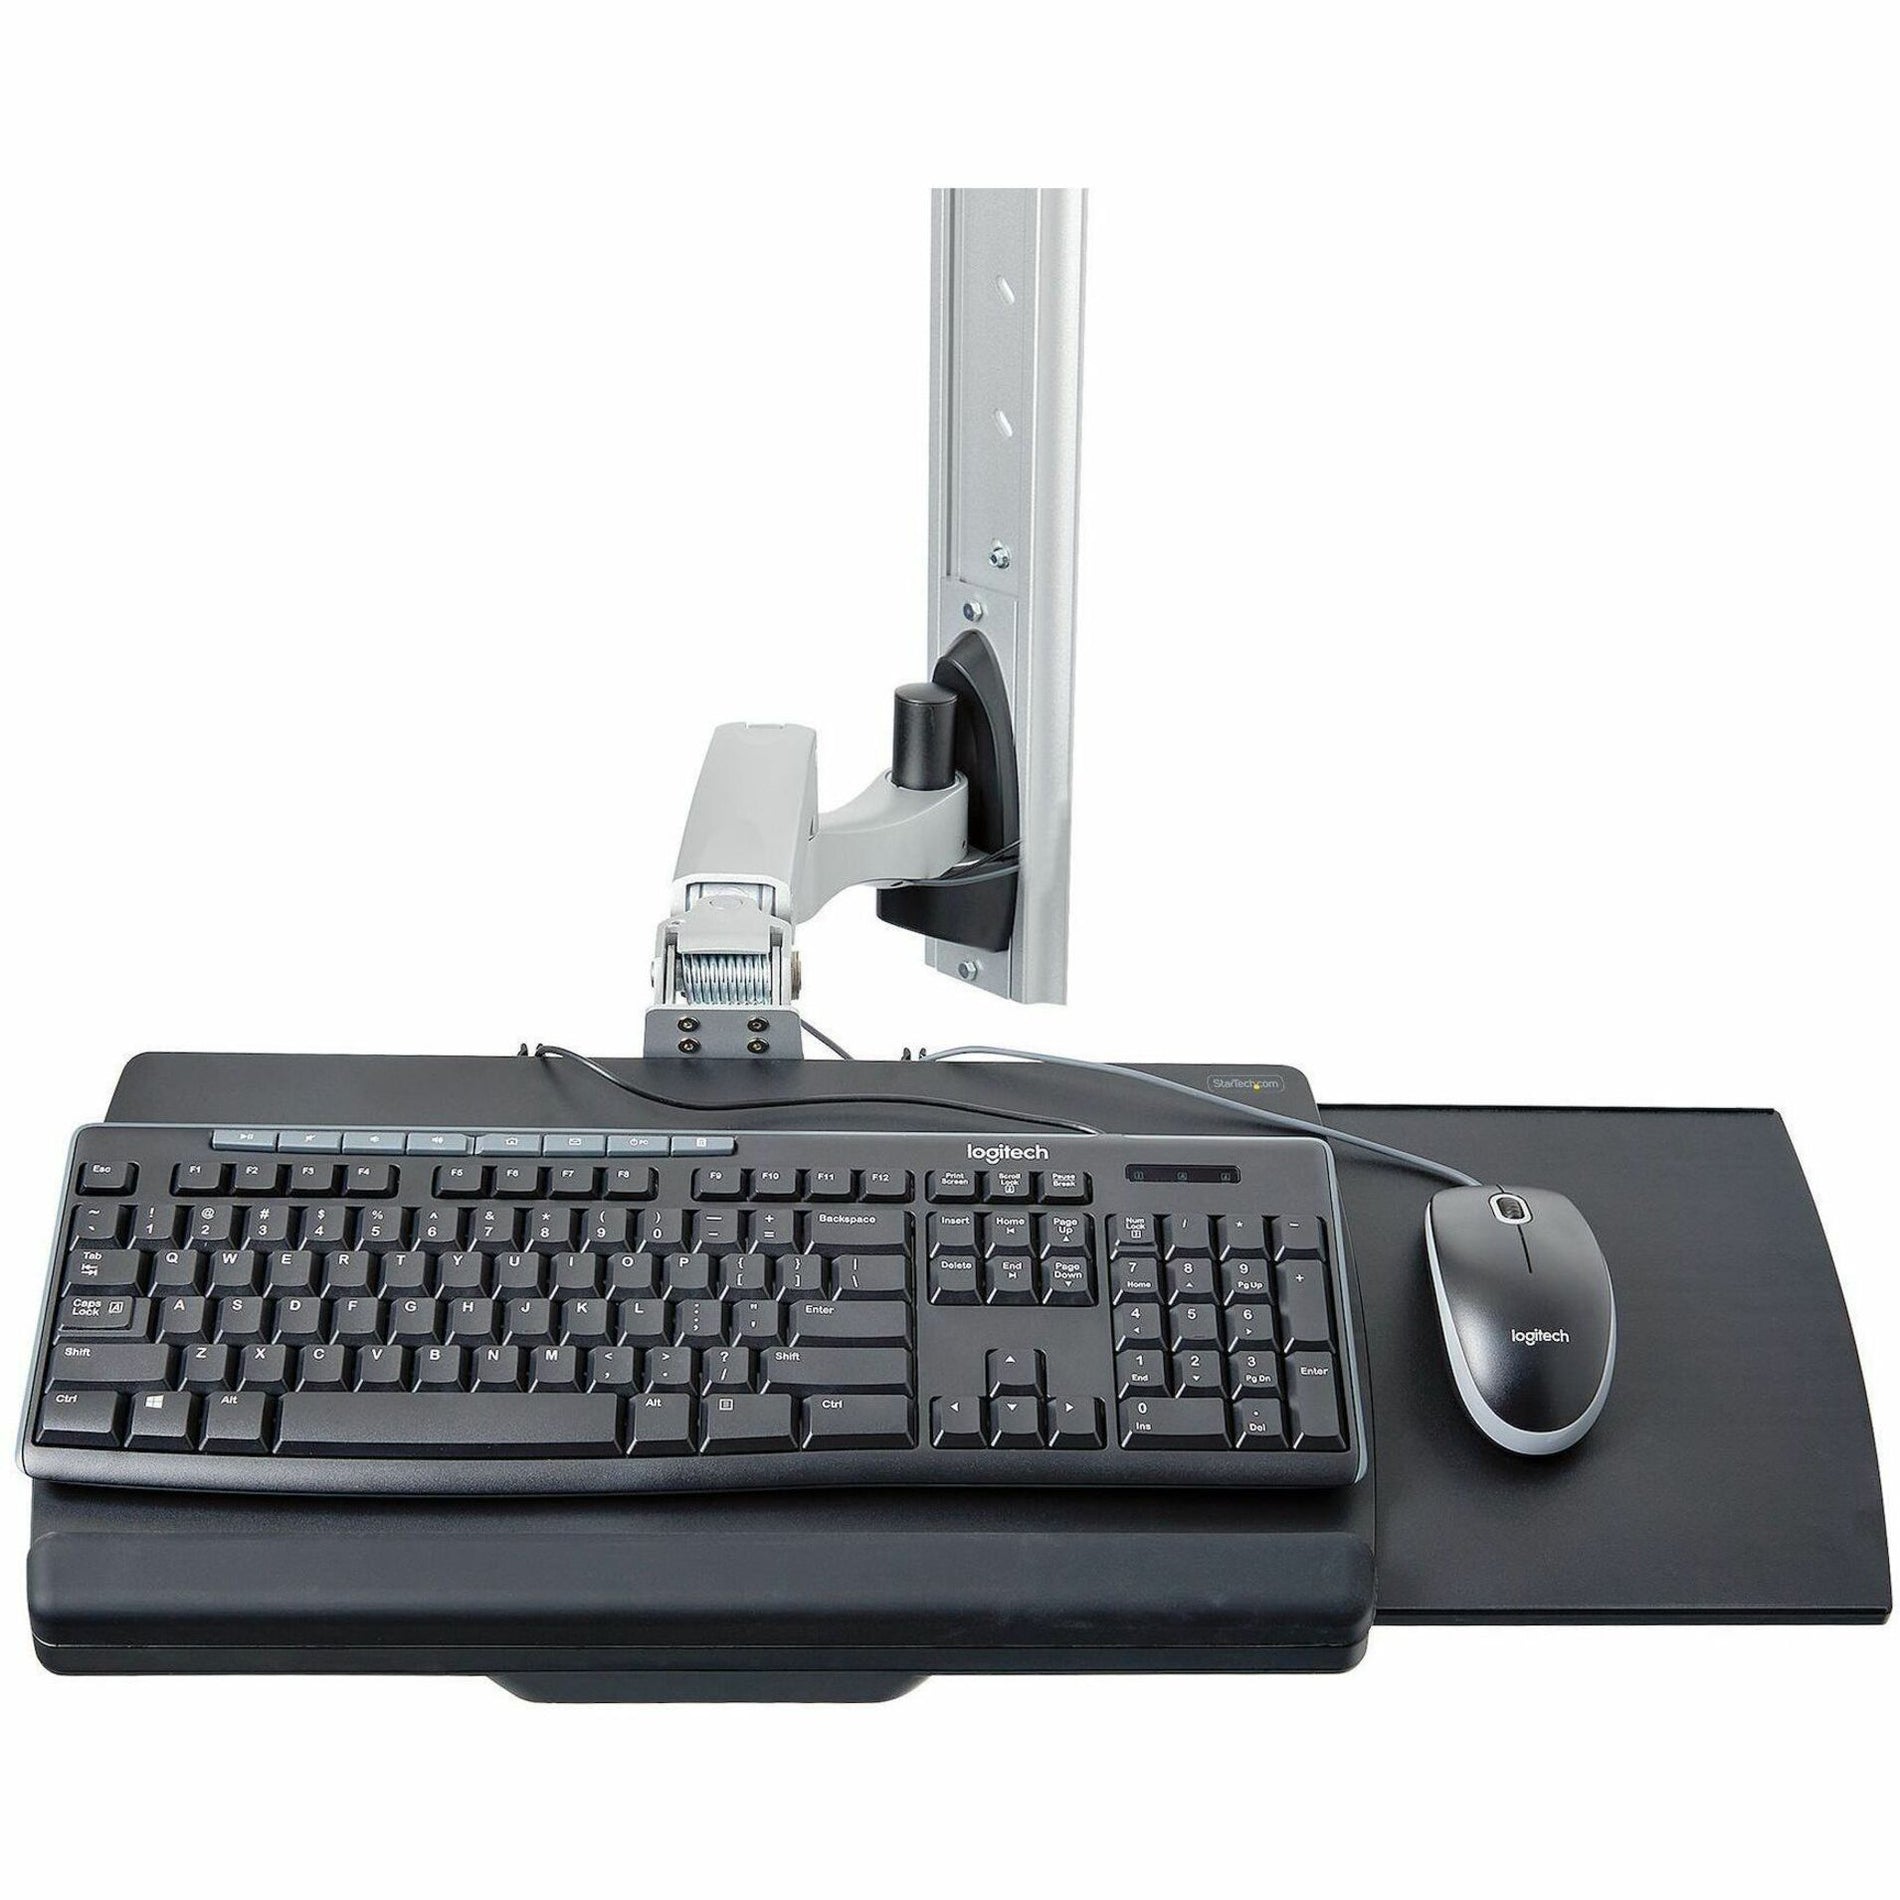 StarTech.com 2PASTSC-WALL-MOUNT Wall Mount, 360° Rotation, Adjustable Arm, Cable Management, Keyboard Tray, 22 lb Maximum Load Capacity